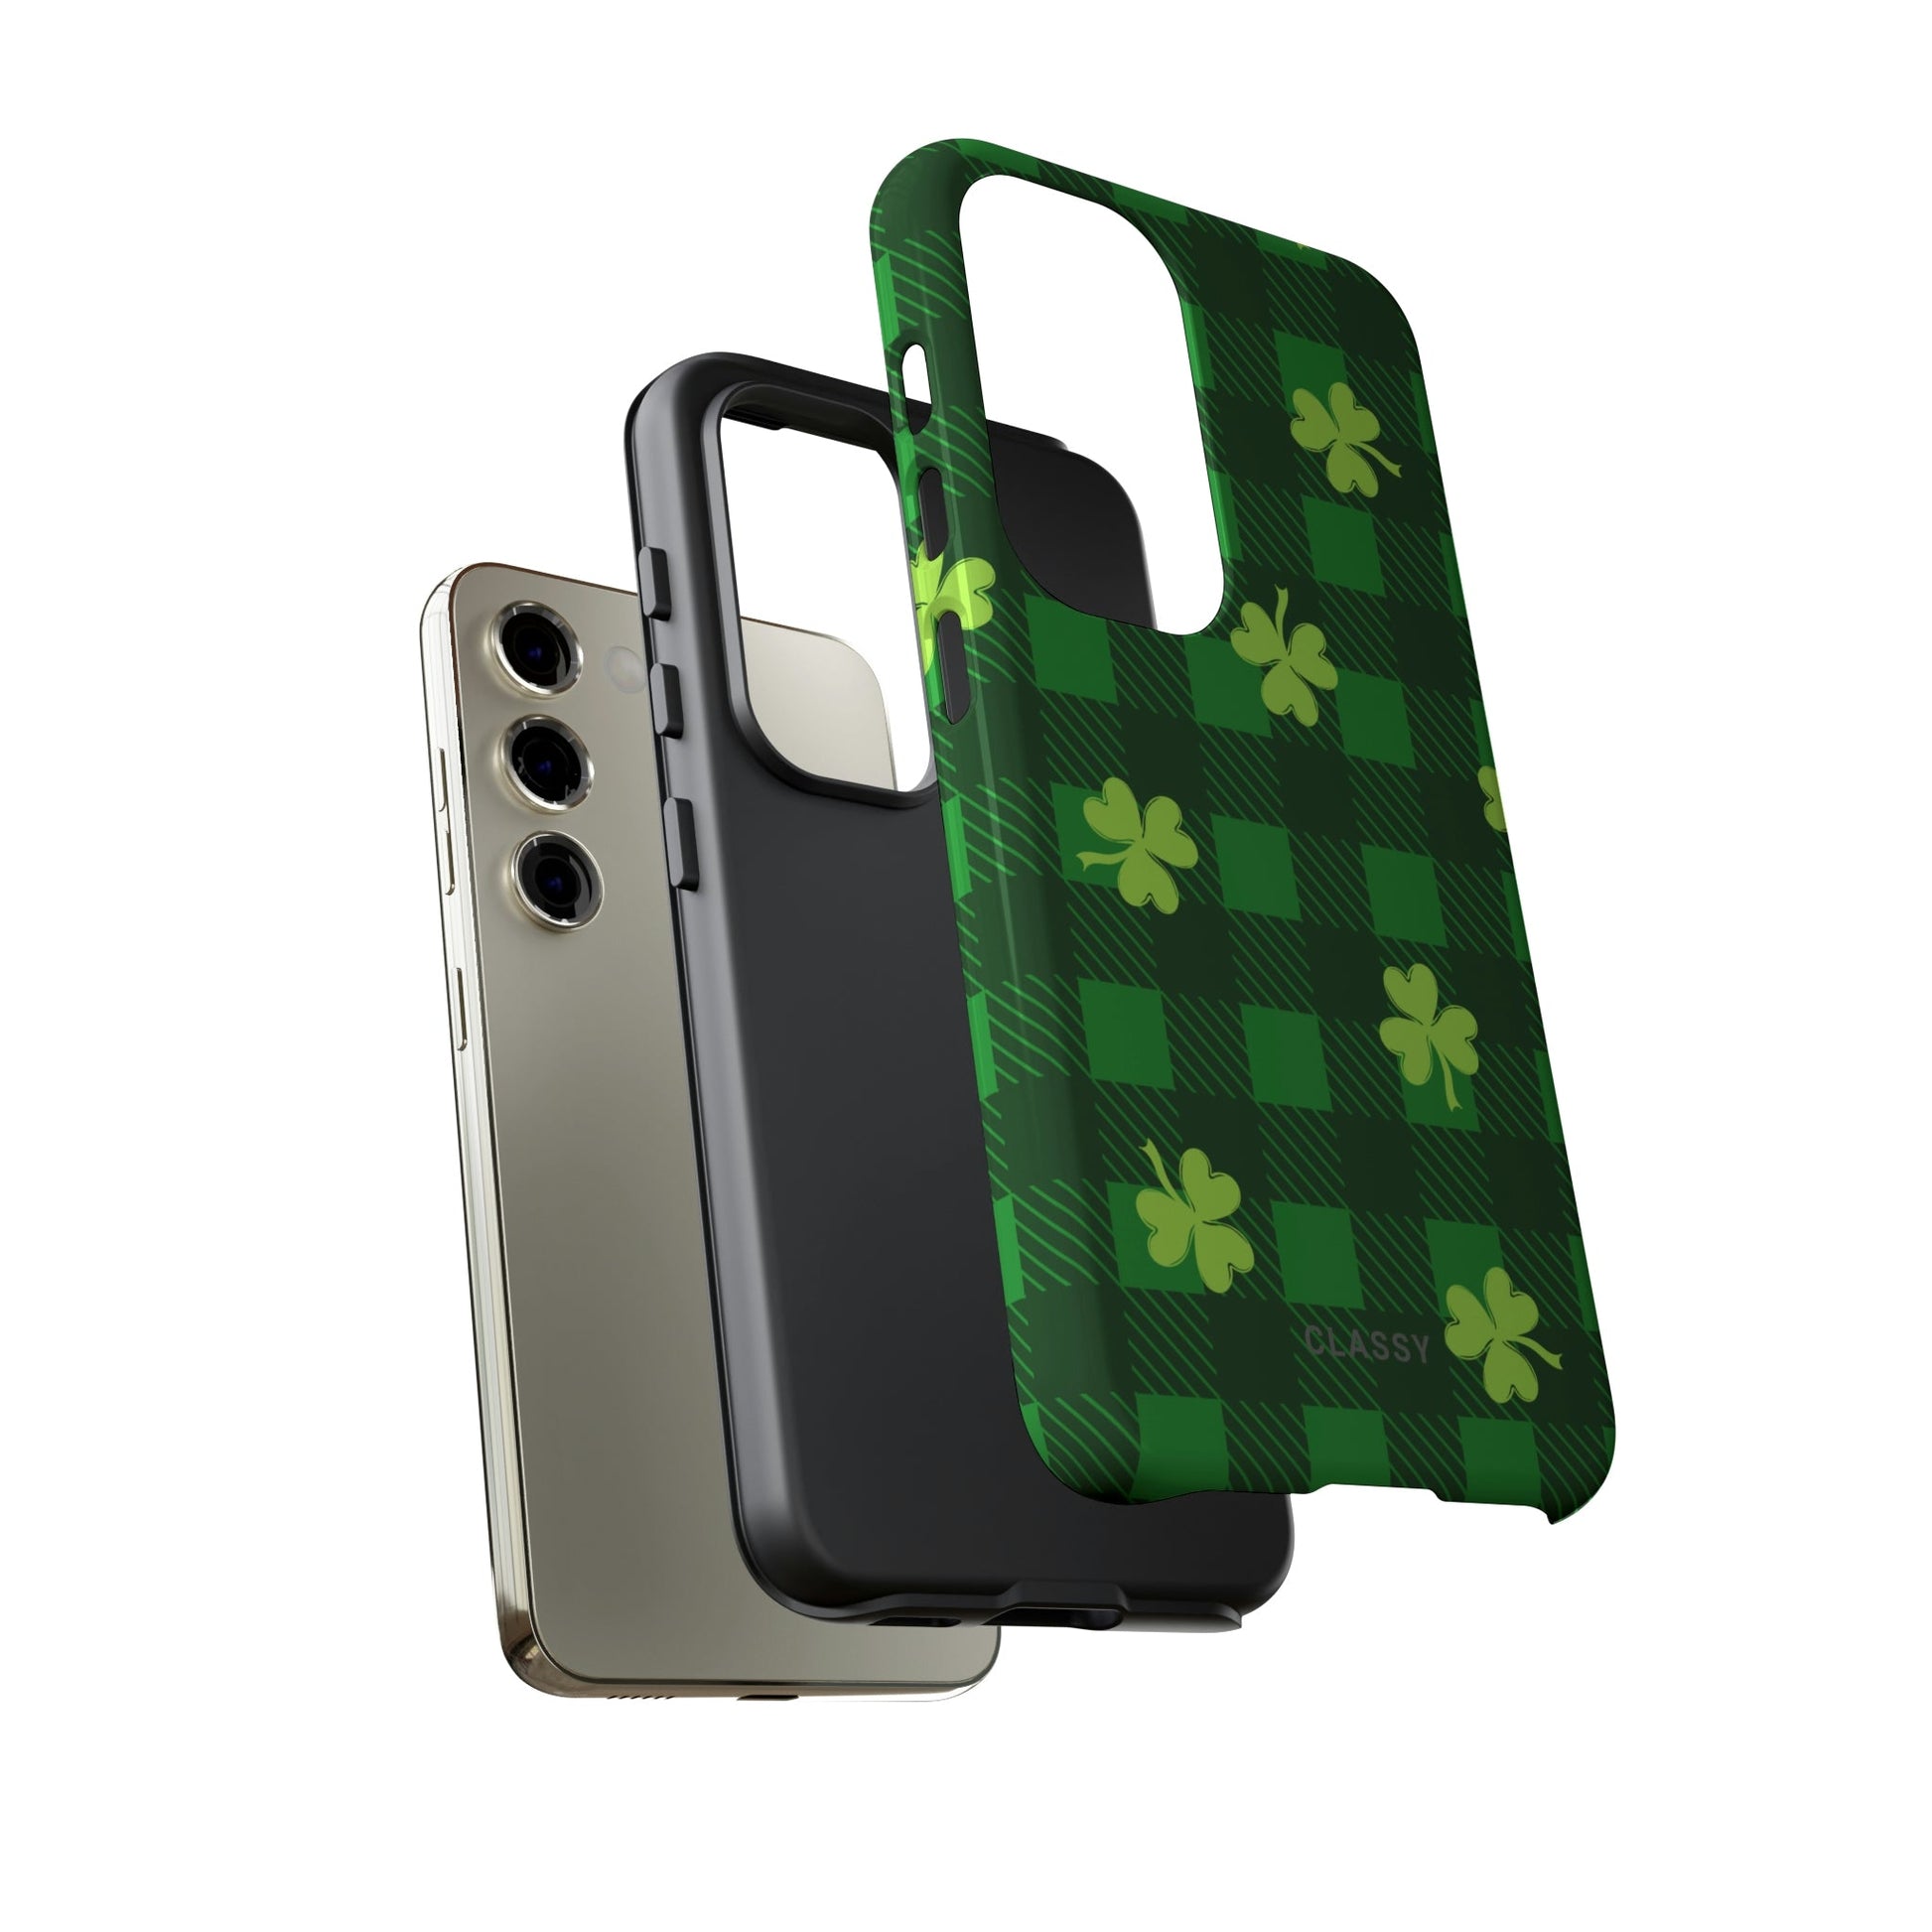 St Patrick's Day Tough Case - Classy Cases - Phone Case - iPhone 12 Pro Max - Glossy -